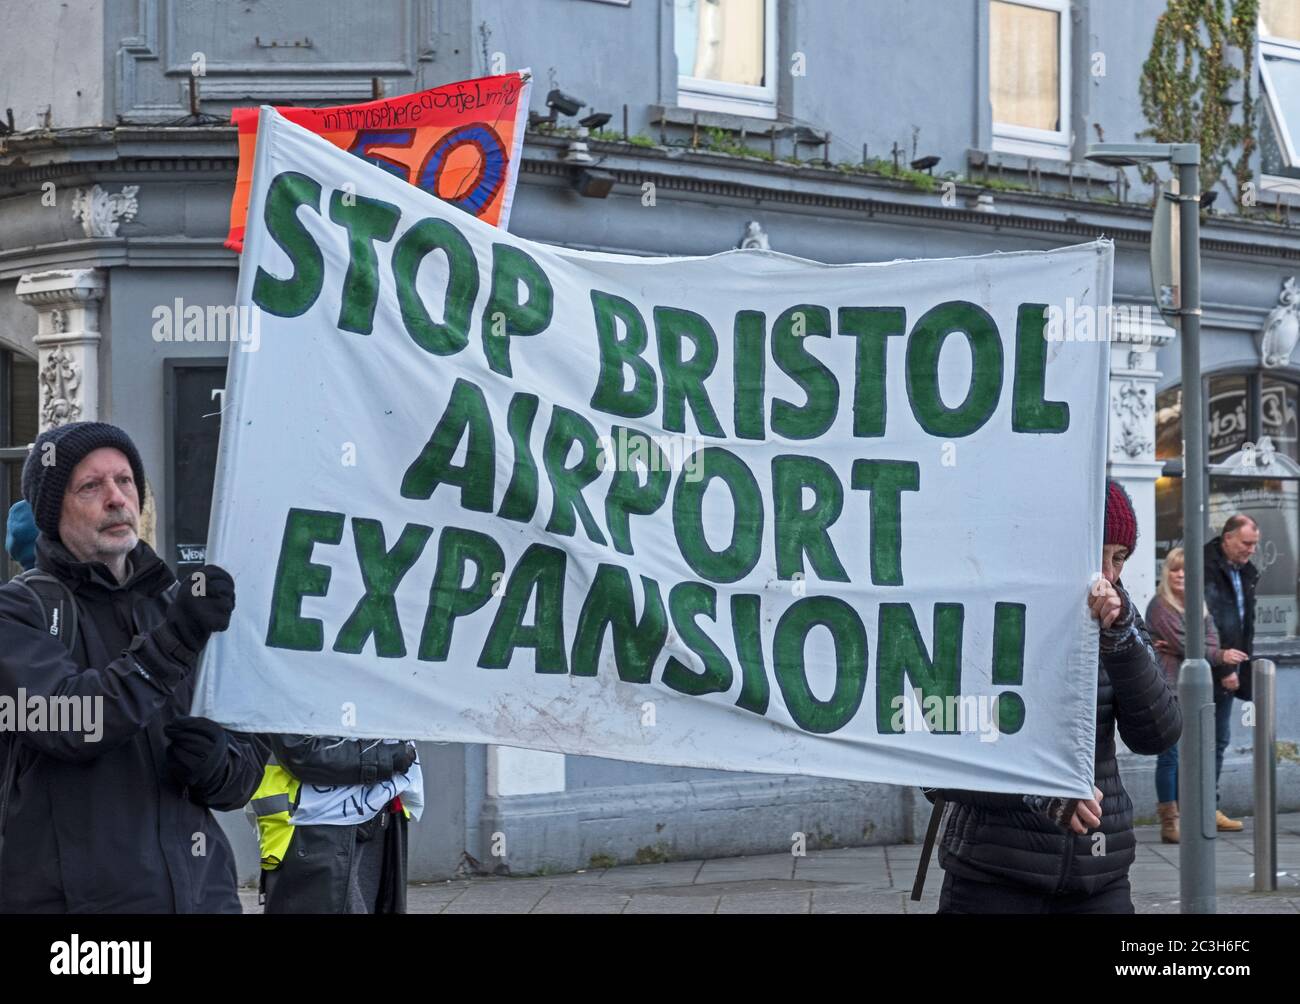 Weston-super-Mare, UK, 8 February 2020. Demonstrators protest against the planned expansion of Bristol Airport in the run-up to a meeting of North Somerset Council’s planning and regulatory committee on 10 February which will decide whether to approve the expansion. Stock Photo